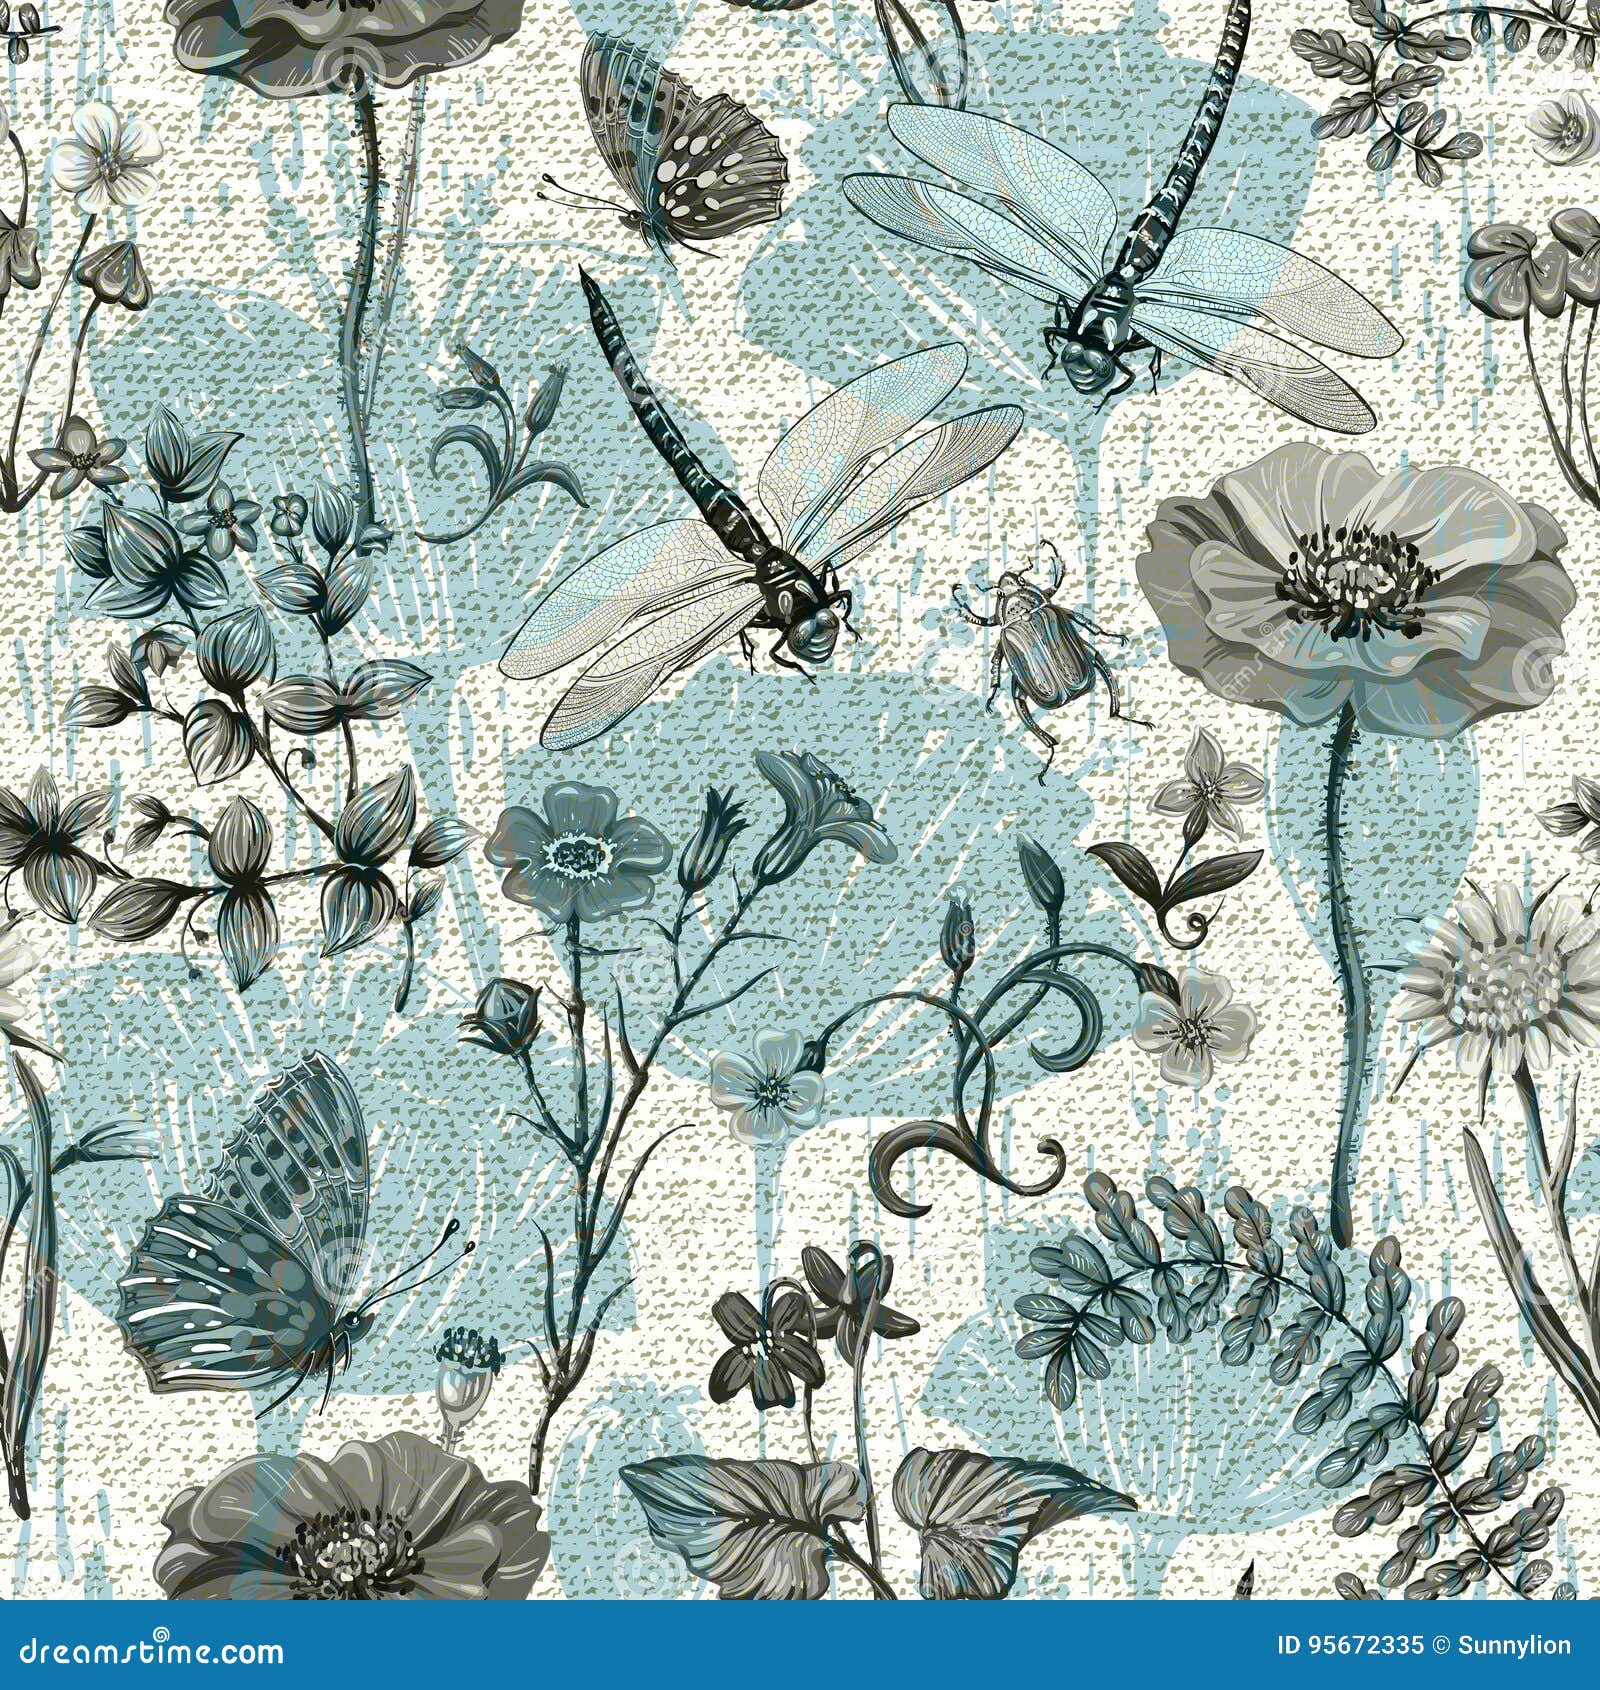 summer  seamless pattern. botanical wallpaper. plants, insects, flowers in vintage style. butterflies, dragonflies